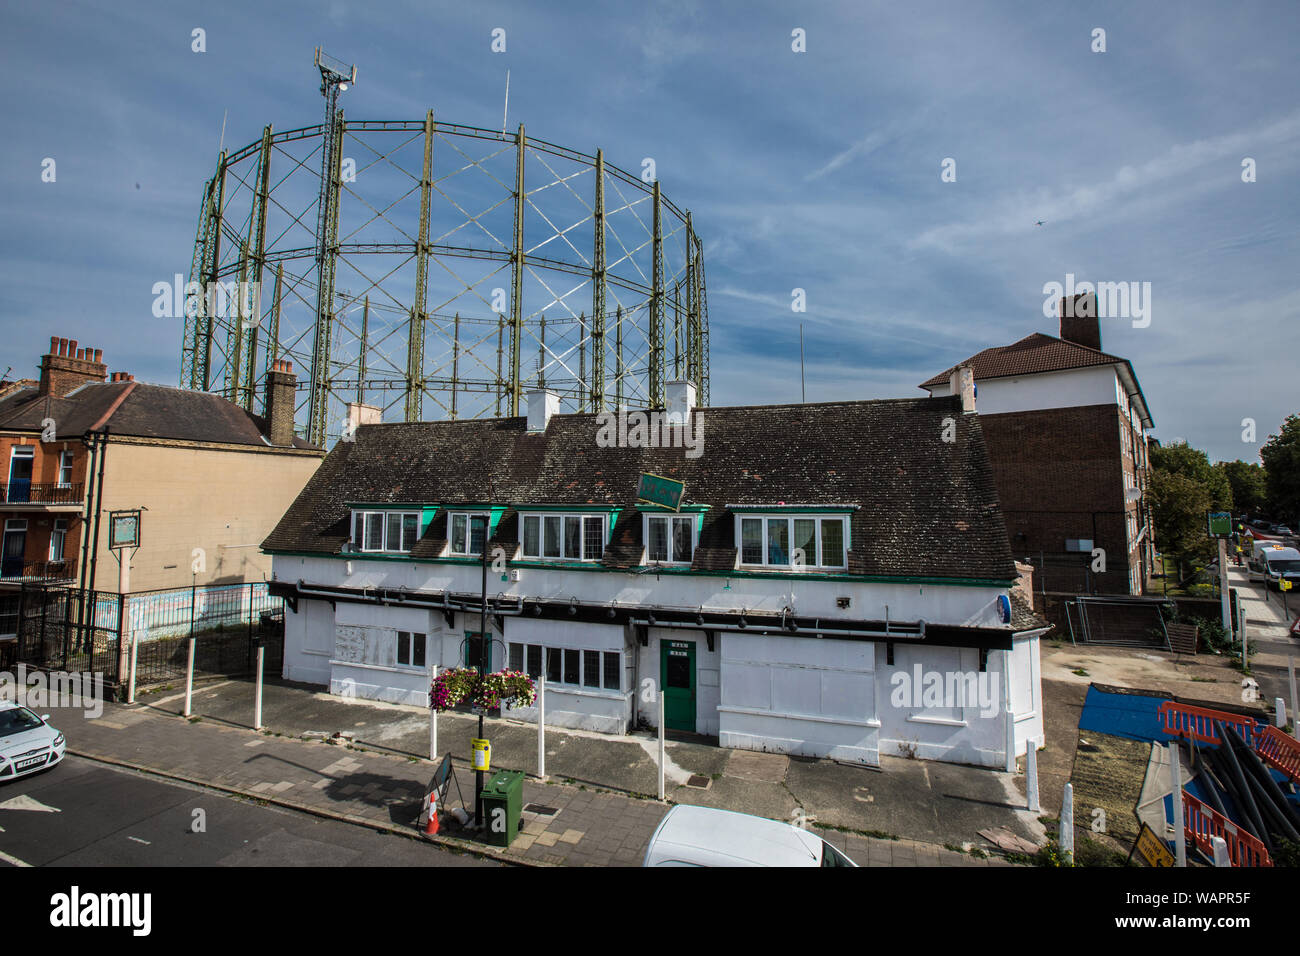 London, UK. 21 August, 2019. The old cricketers pub and gasometer viewed from the back of the Peter May stand at the Kia Oval home to Surrey Cricket Club  as Surrey take on Hampshire on day four of the Specsavers County Championship game. David Rowe/Alamy Live News Stock Photo